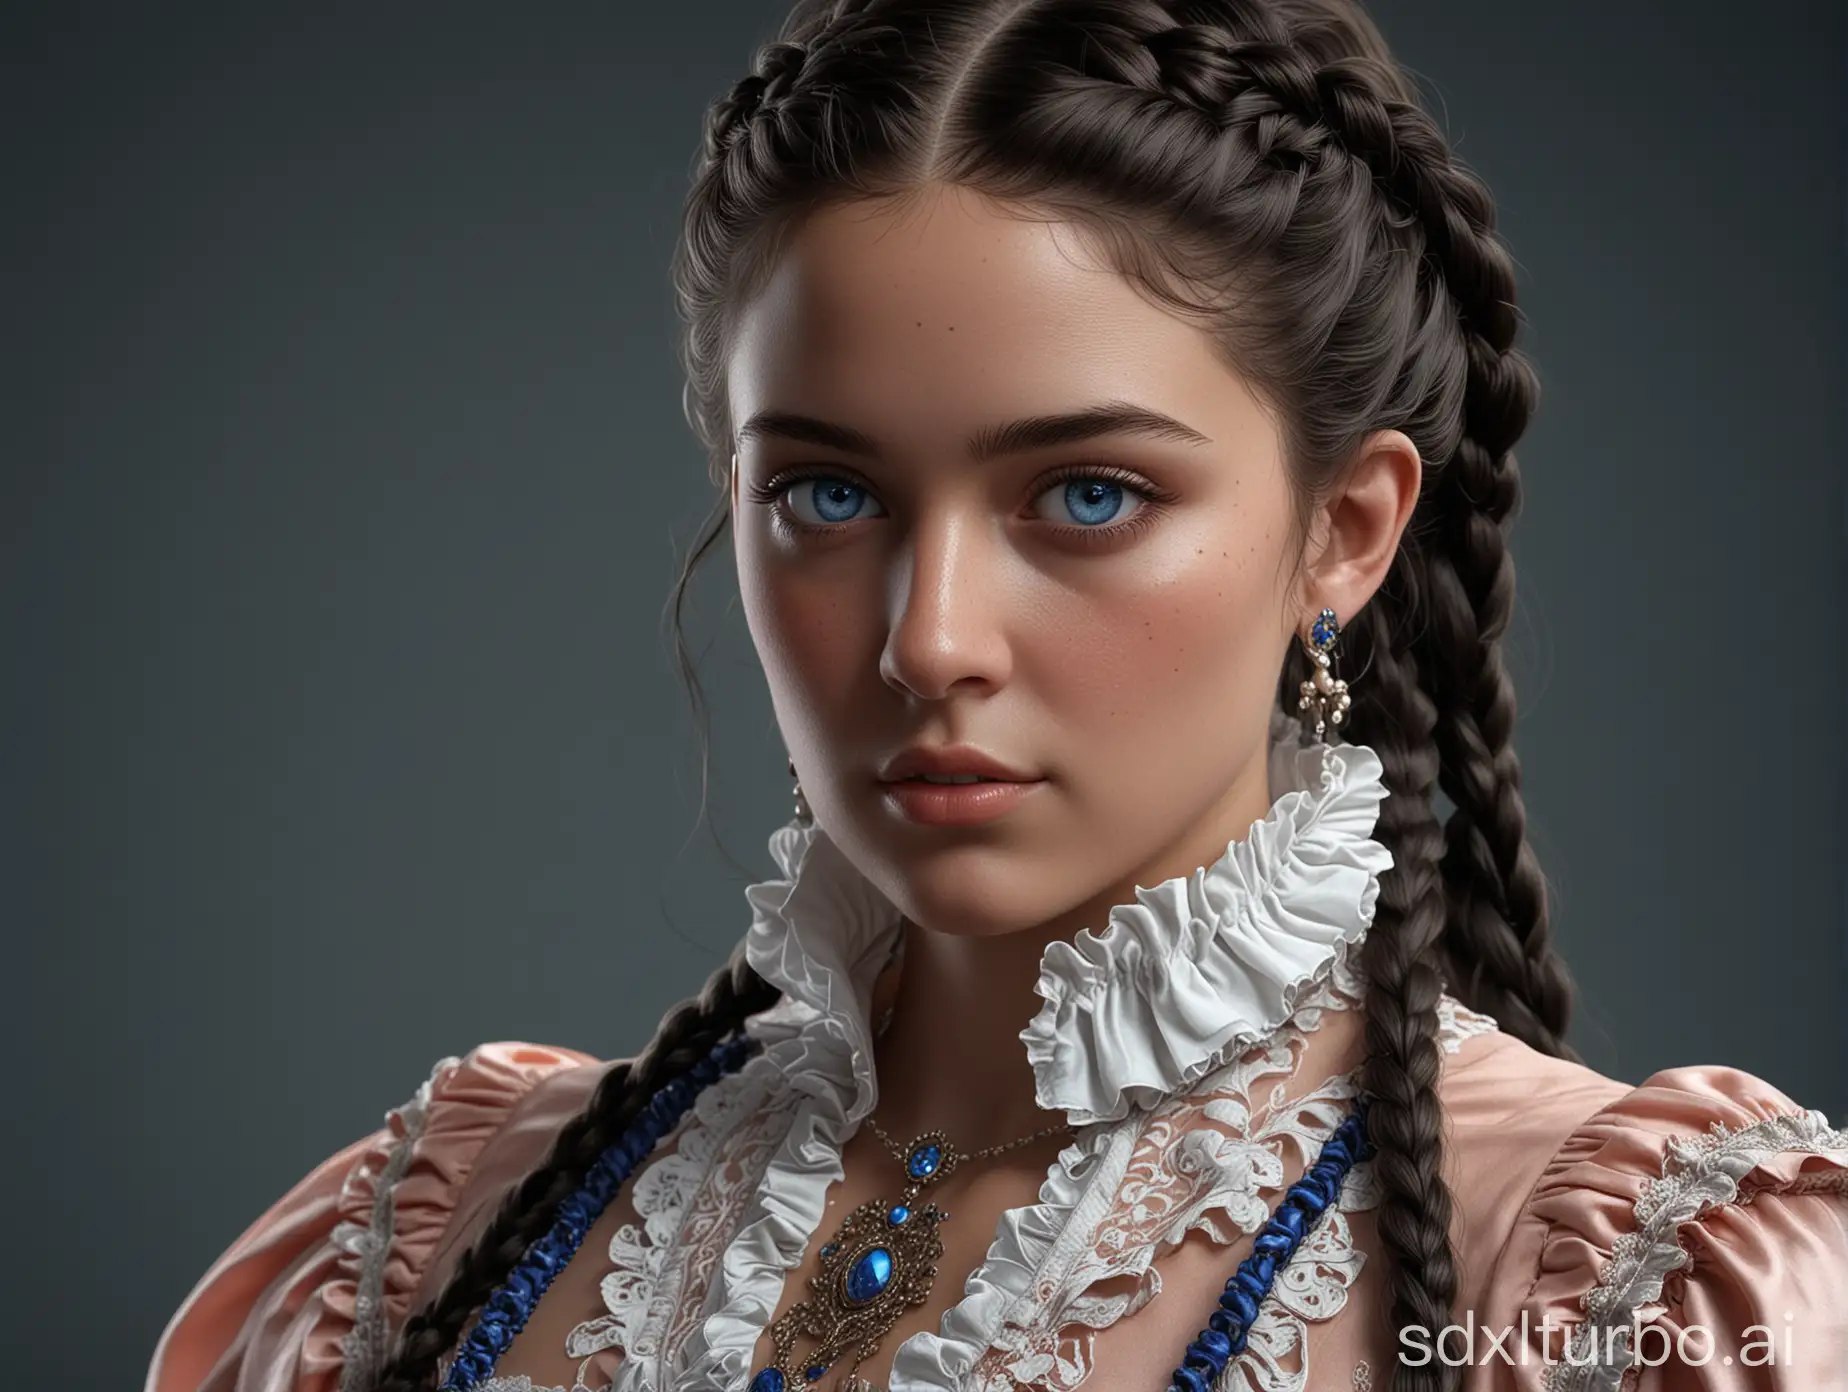 Louis-XIV-Style-French-Girl-Portrait-Masterpiece-Concept-Art-with-Intricate-Details